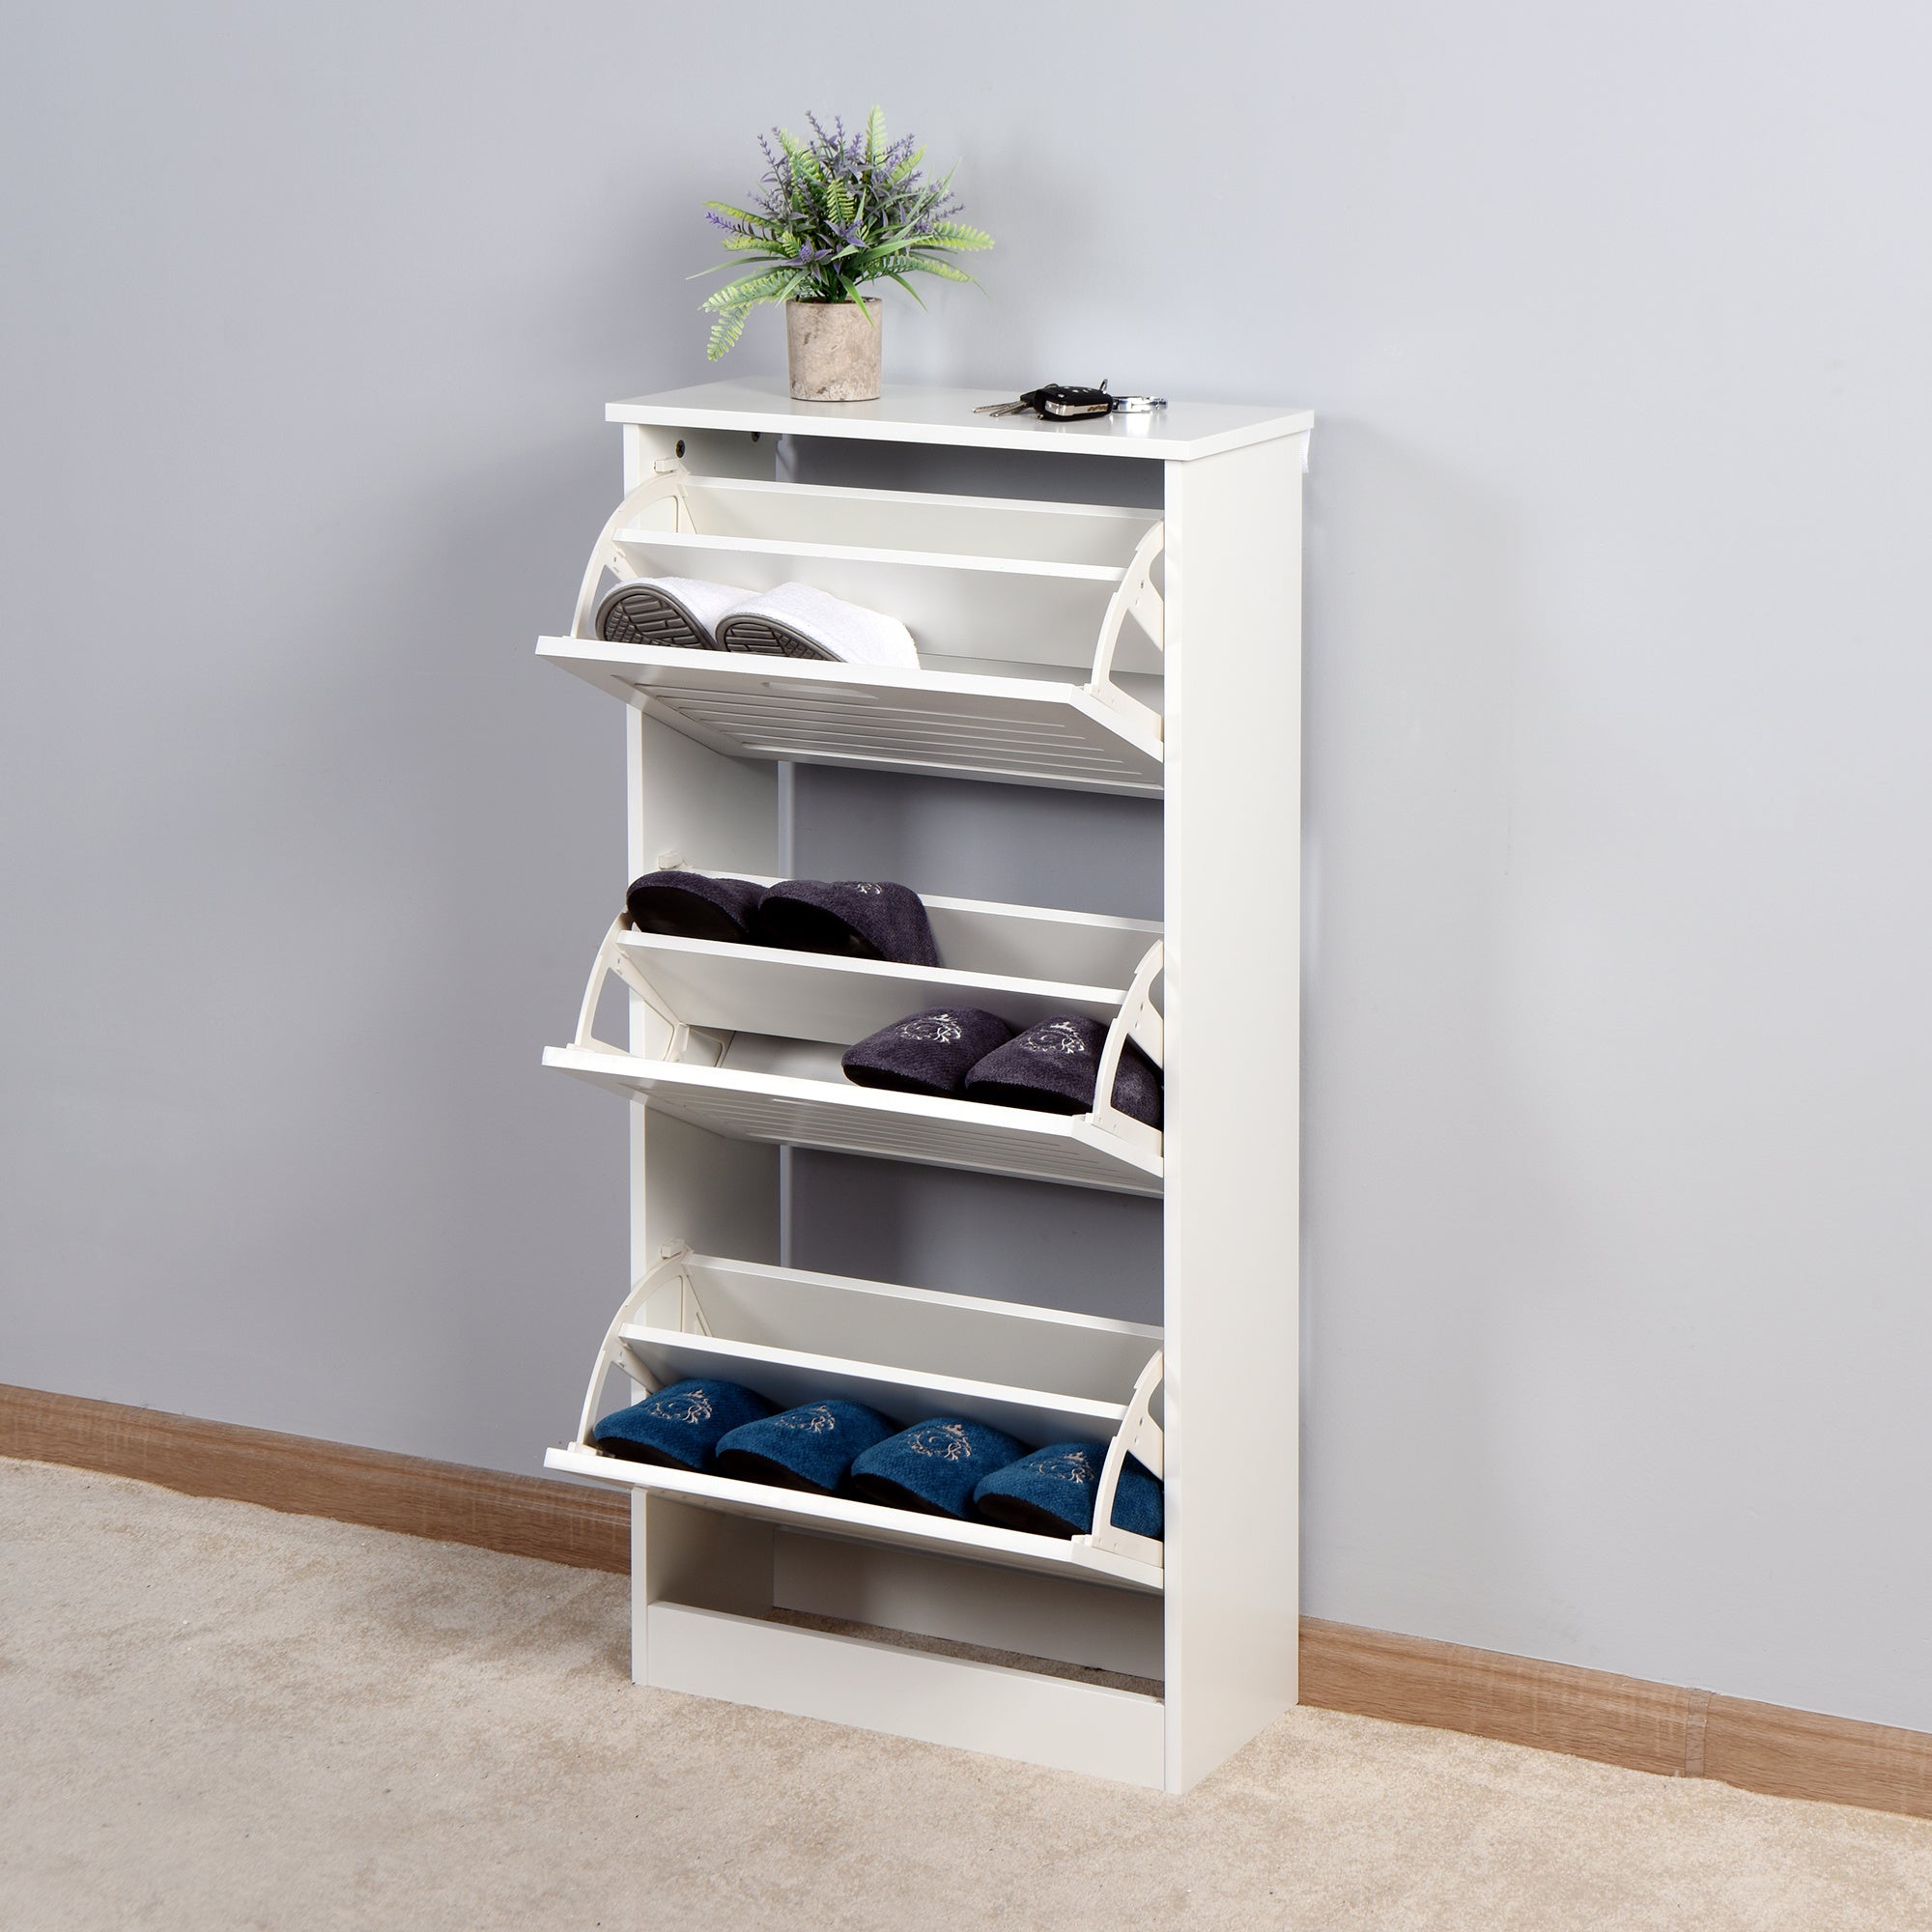 PQ3- Wooden Shoe Cabinet for Entryway;  White Shoe Storage Cabinet with 3 Flip Doors 20.94x9.45x43.11 inch